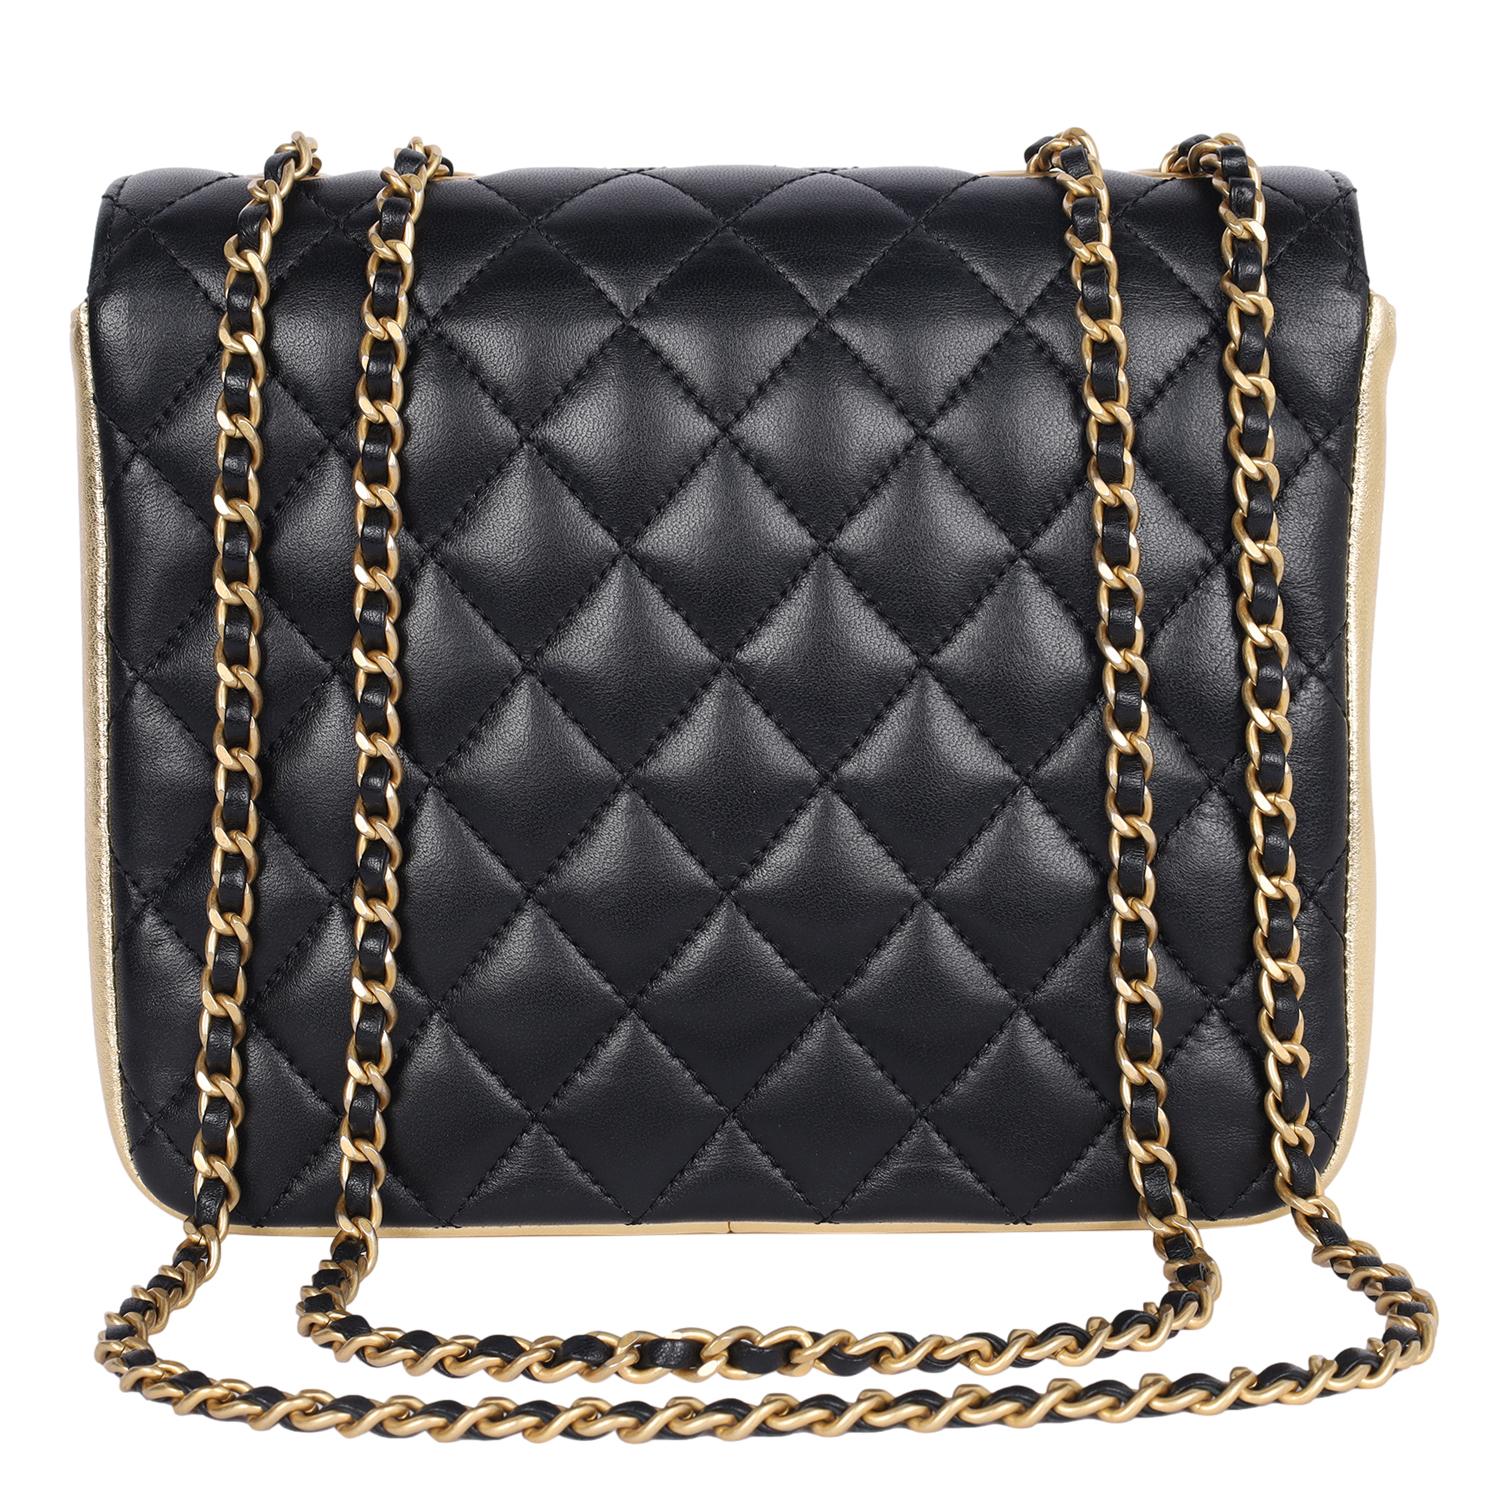 Authentic, pre-loved Chanel black double flap quilted lambskin leather shoulder cross body bag. Features quilted leather with gold accent leather, gold CC hardware, a long gold chain strap with leather insert, front clasp CC closure. The interior